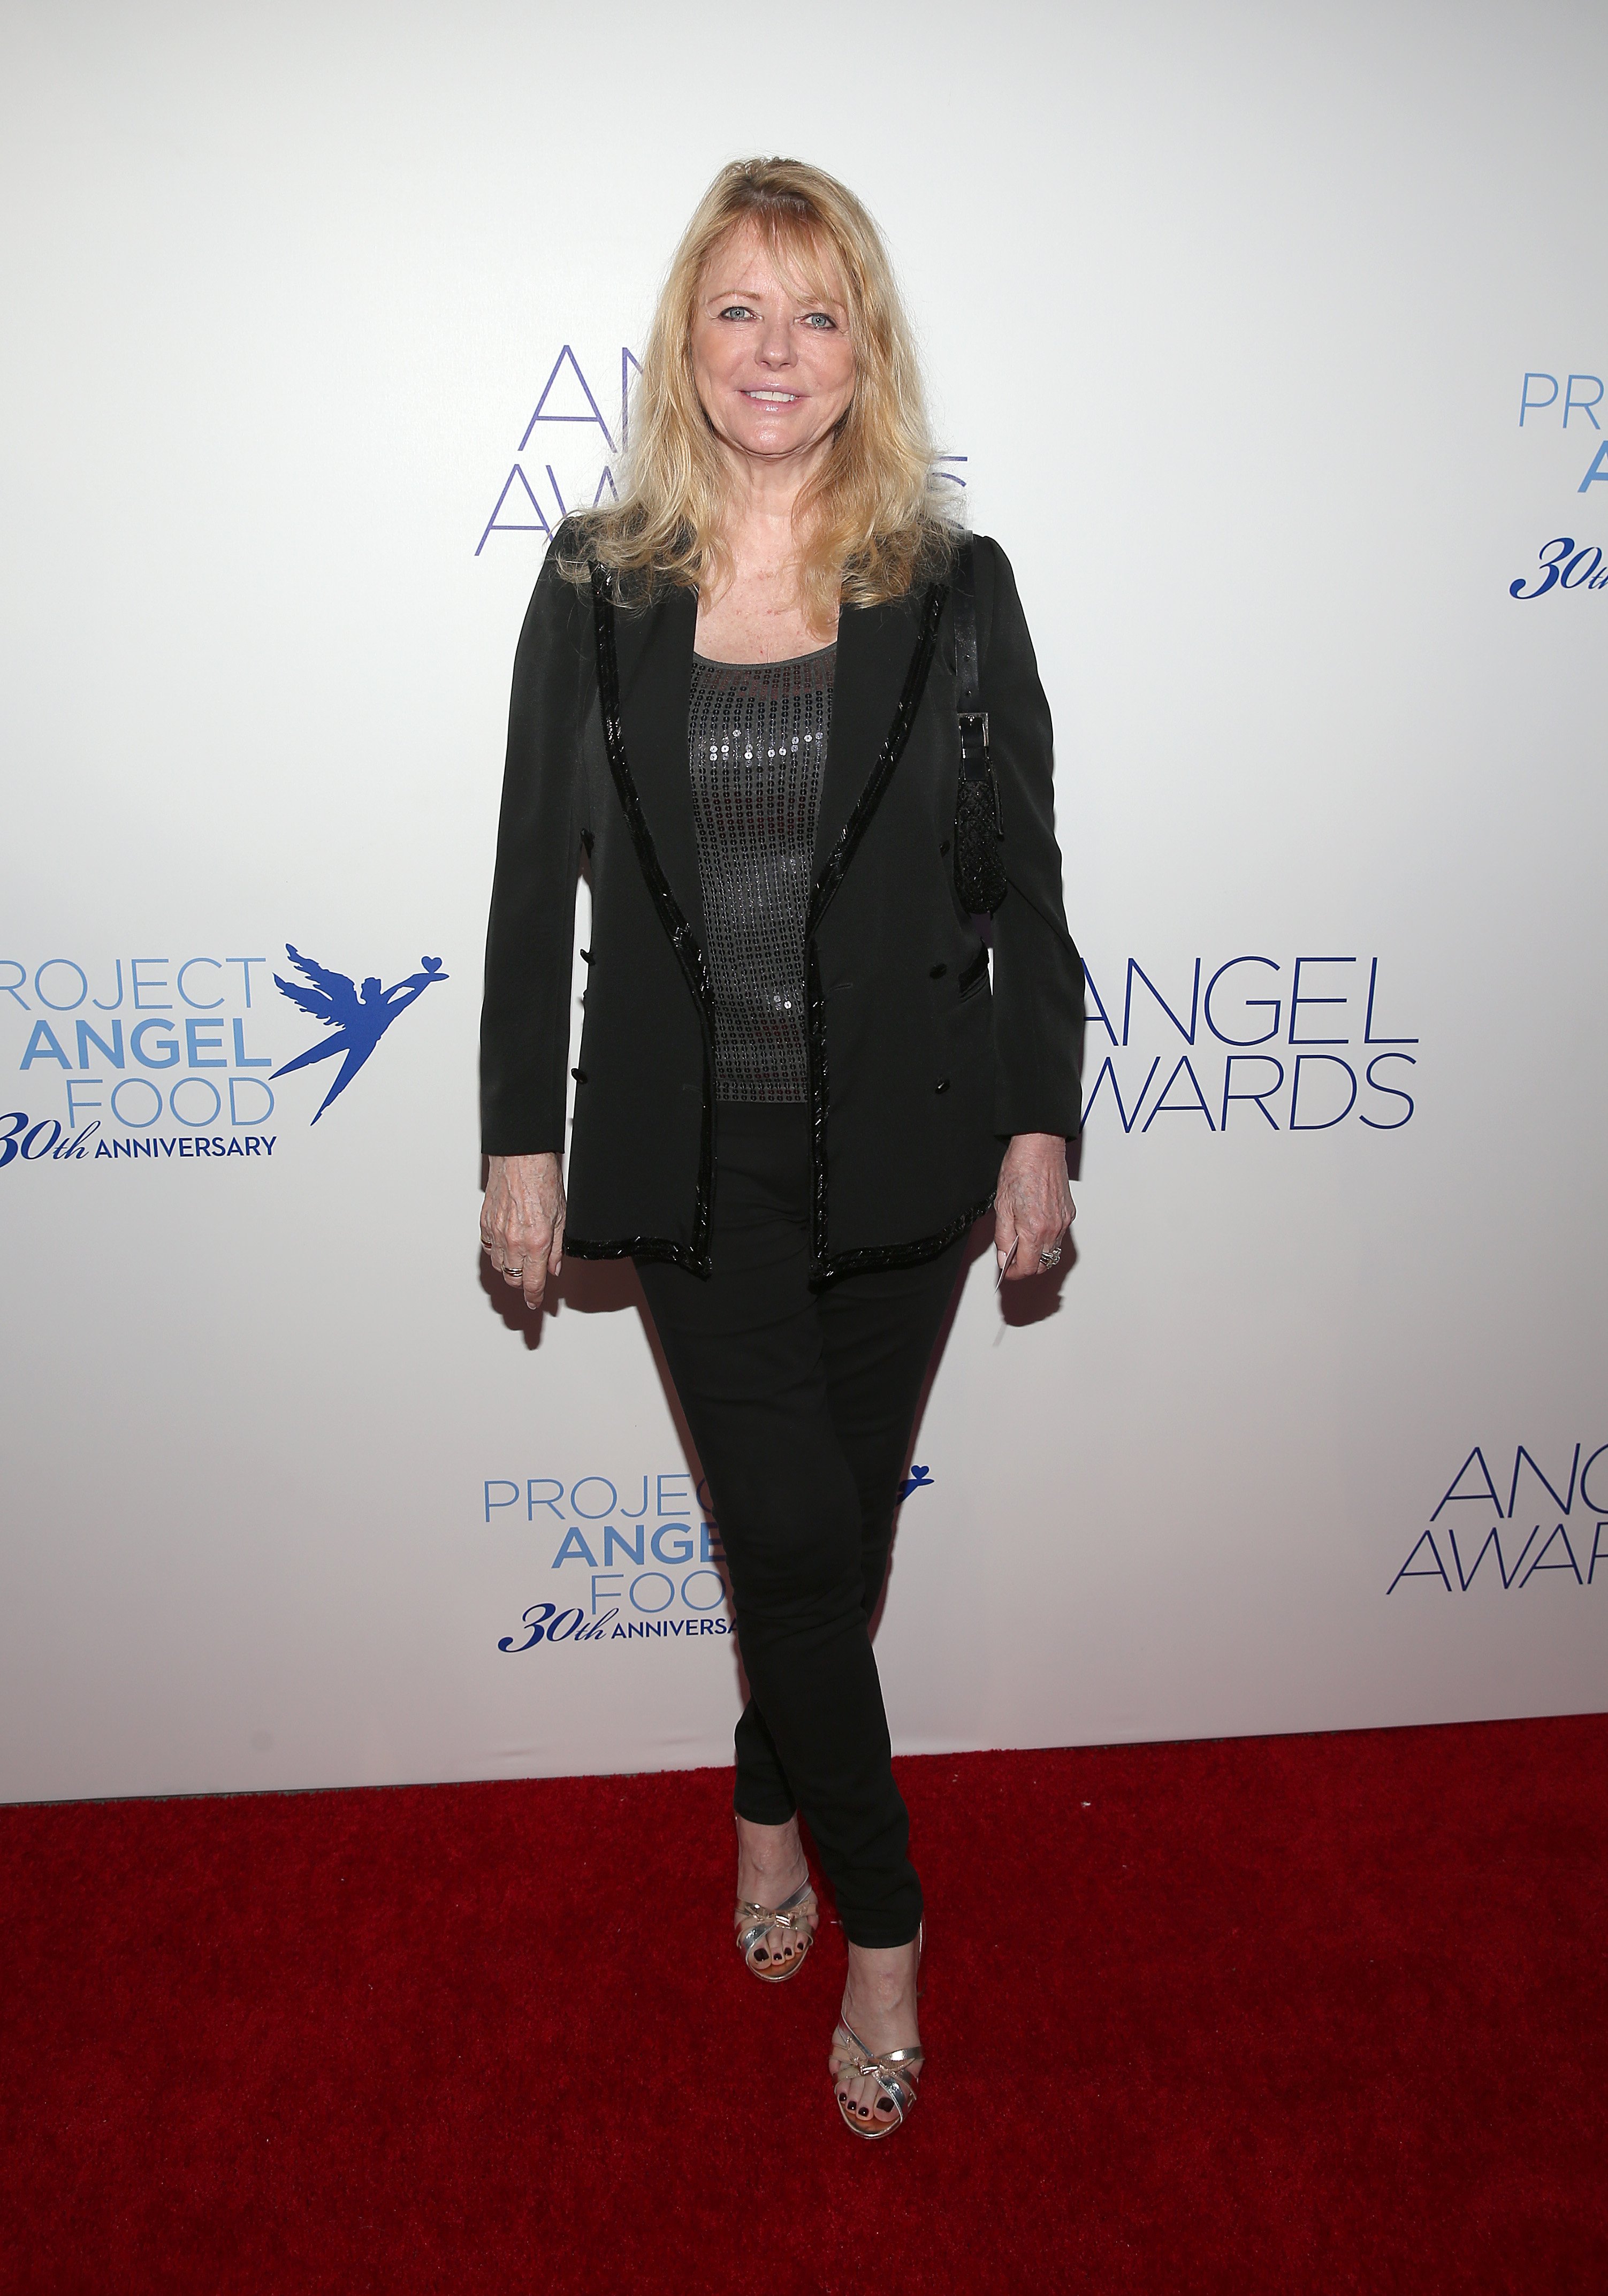 Cheryl Tiegs attends Project Angel Food's Angel Awards Gala at Project Angel Food on September 14, 2019, in Los Angeles, California. | Source: Getty Images.